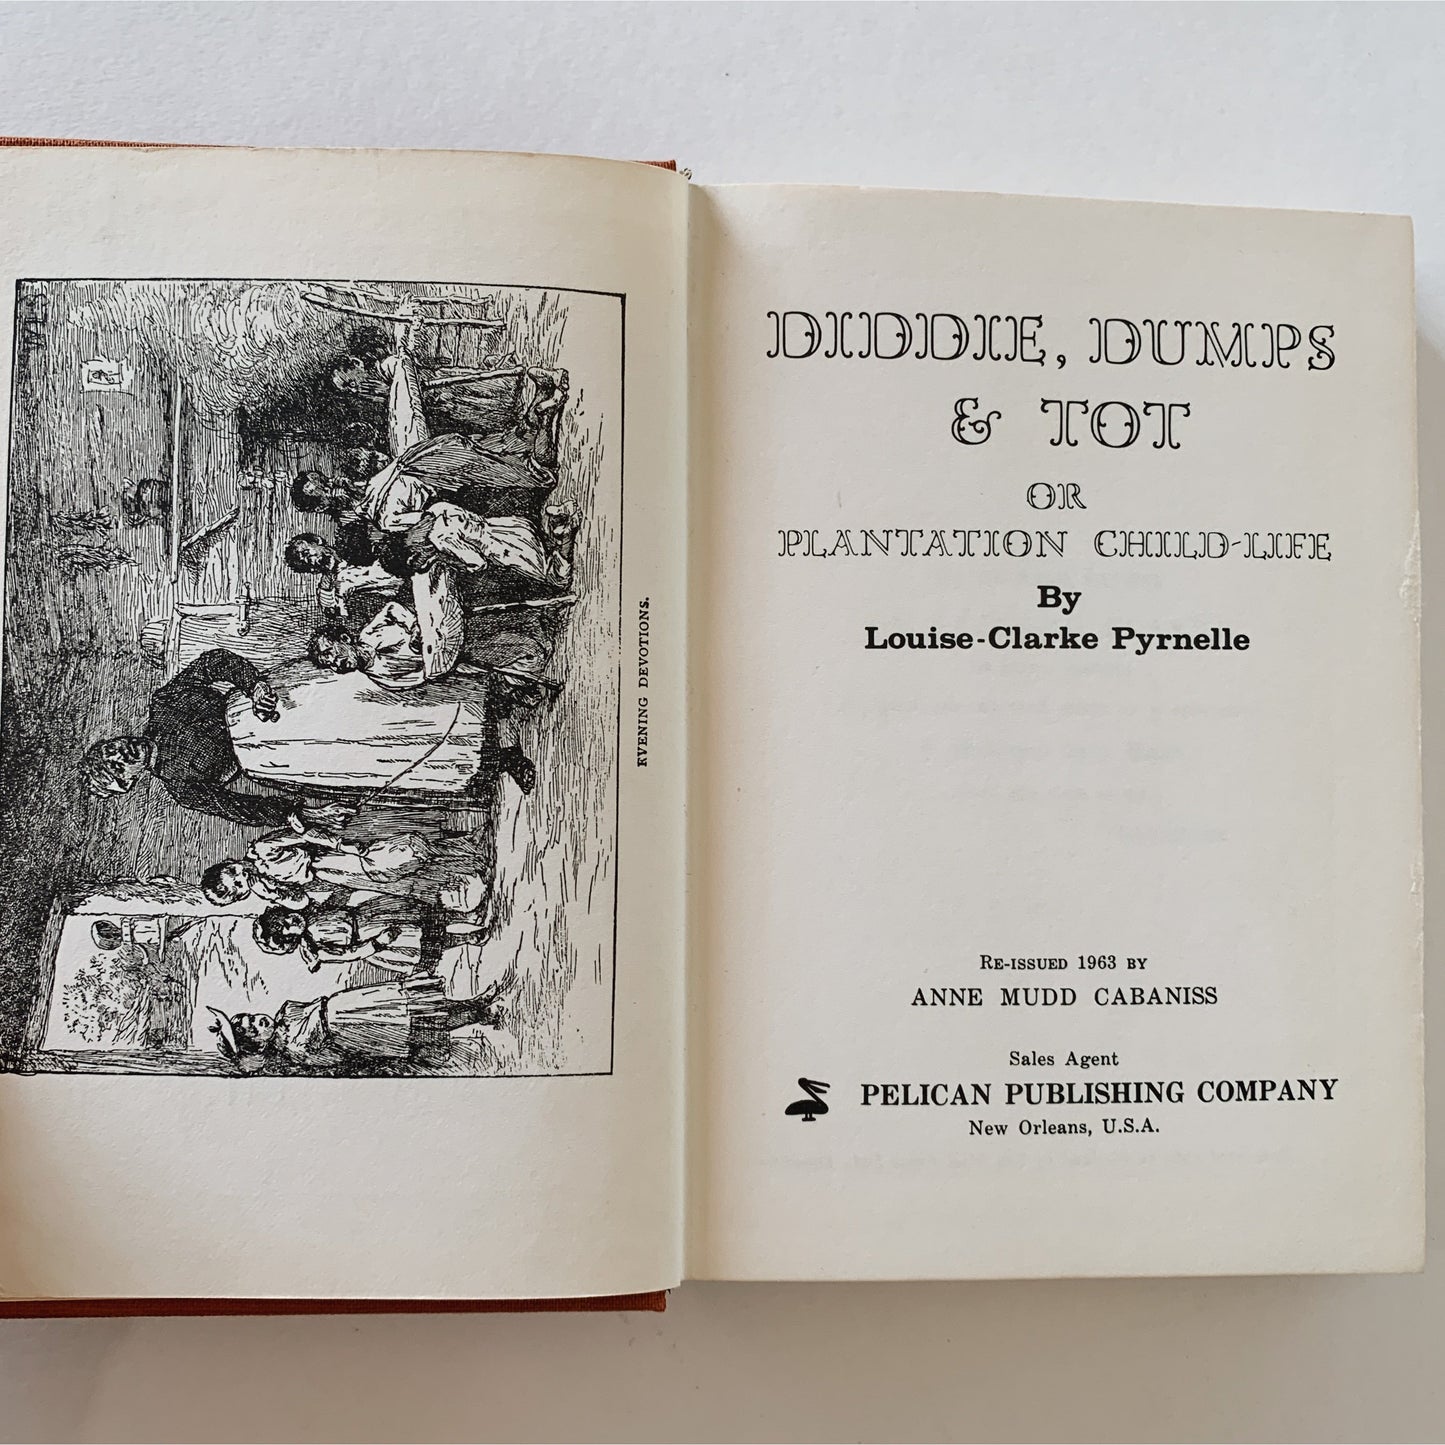 Diddie, Dumps and Tot or Plantation Child-Life, Louise-Clarke Pyrnelle, 1963, Hardcover